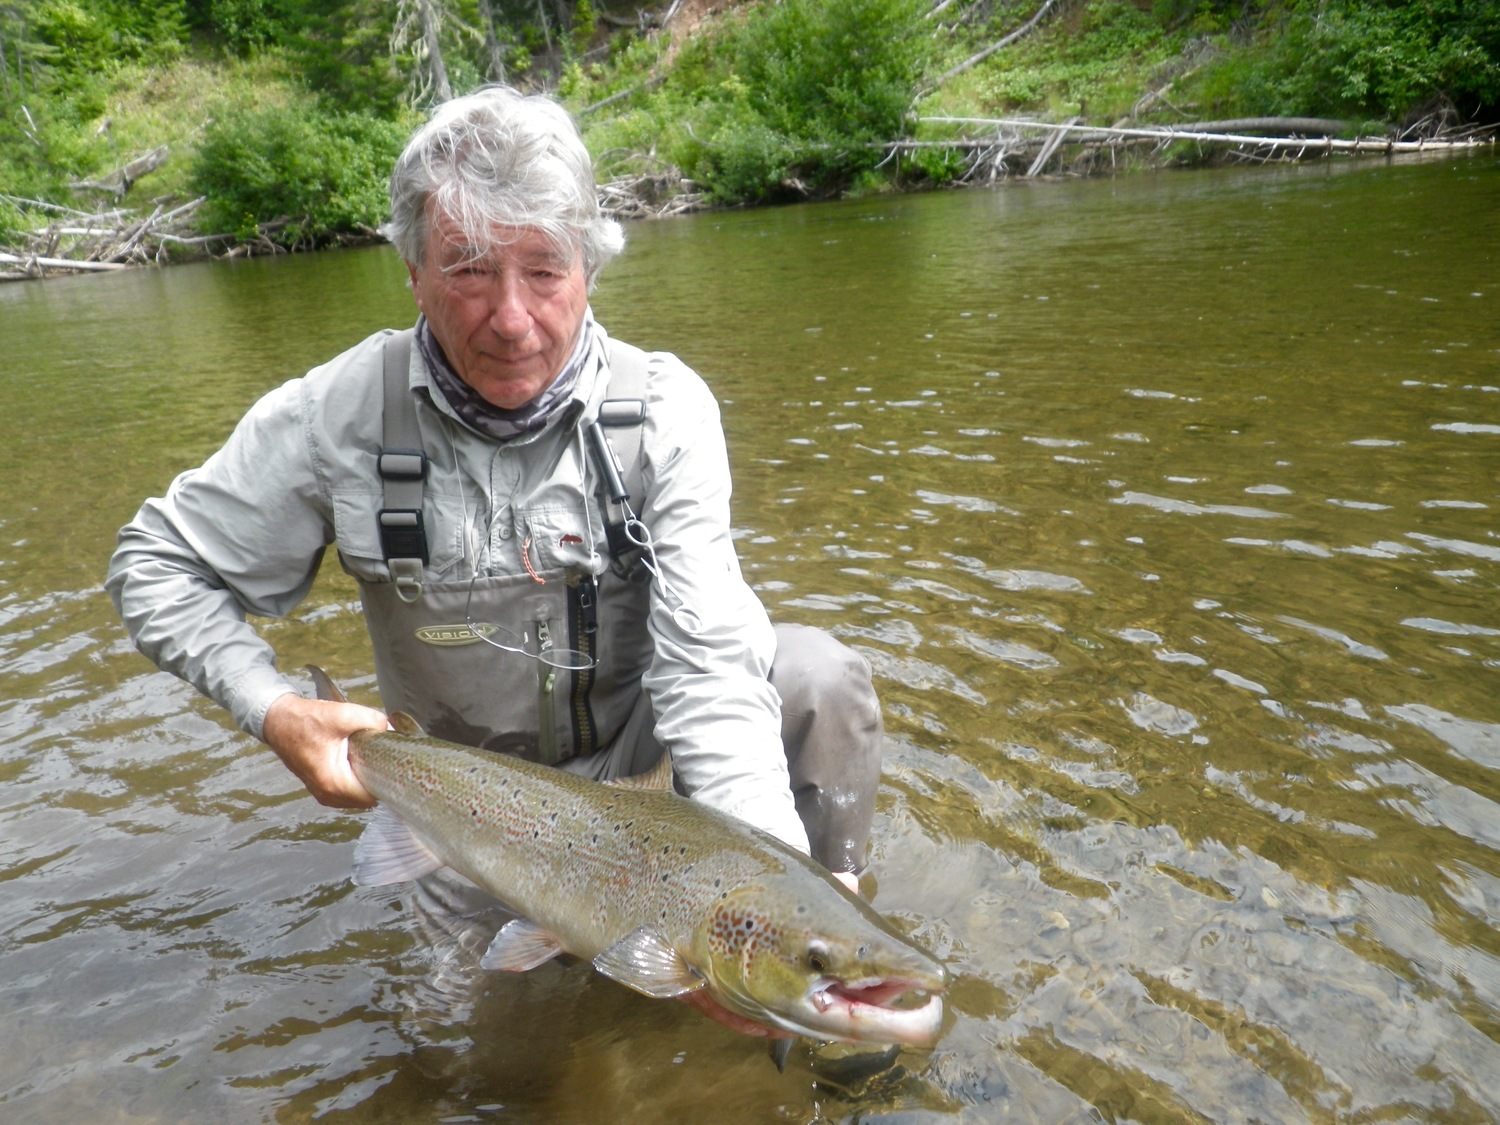 Rolf realeases a nice salmon back to the Grand Cascapedia, Nice one Rolf!